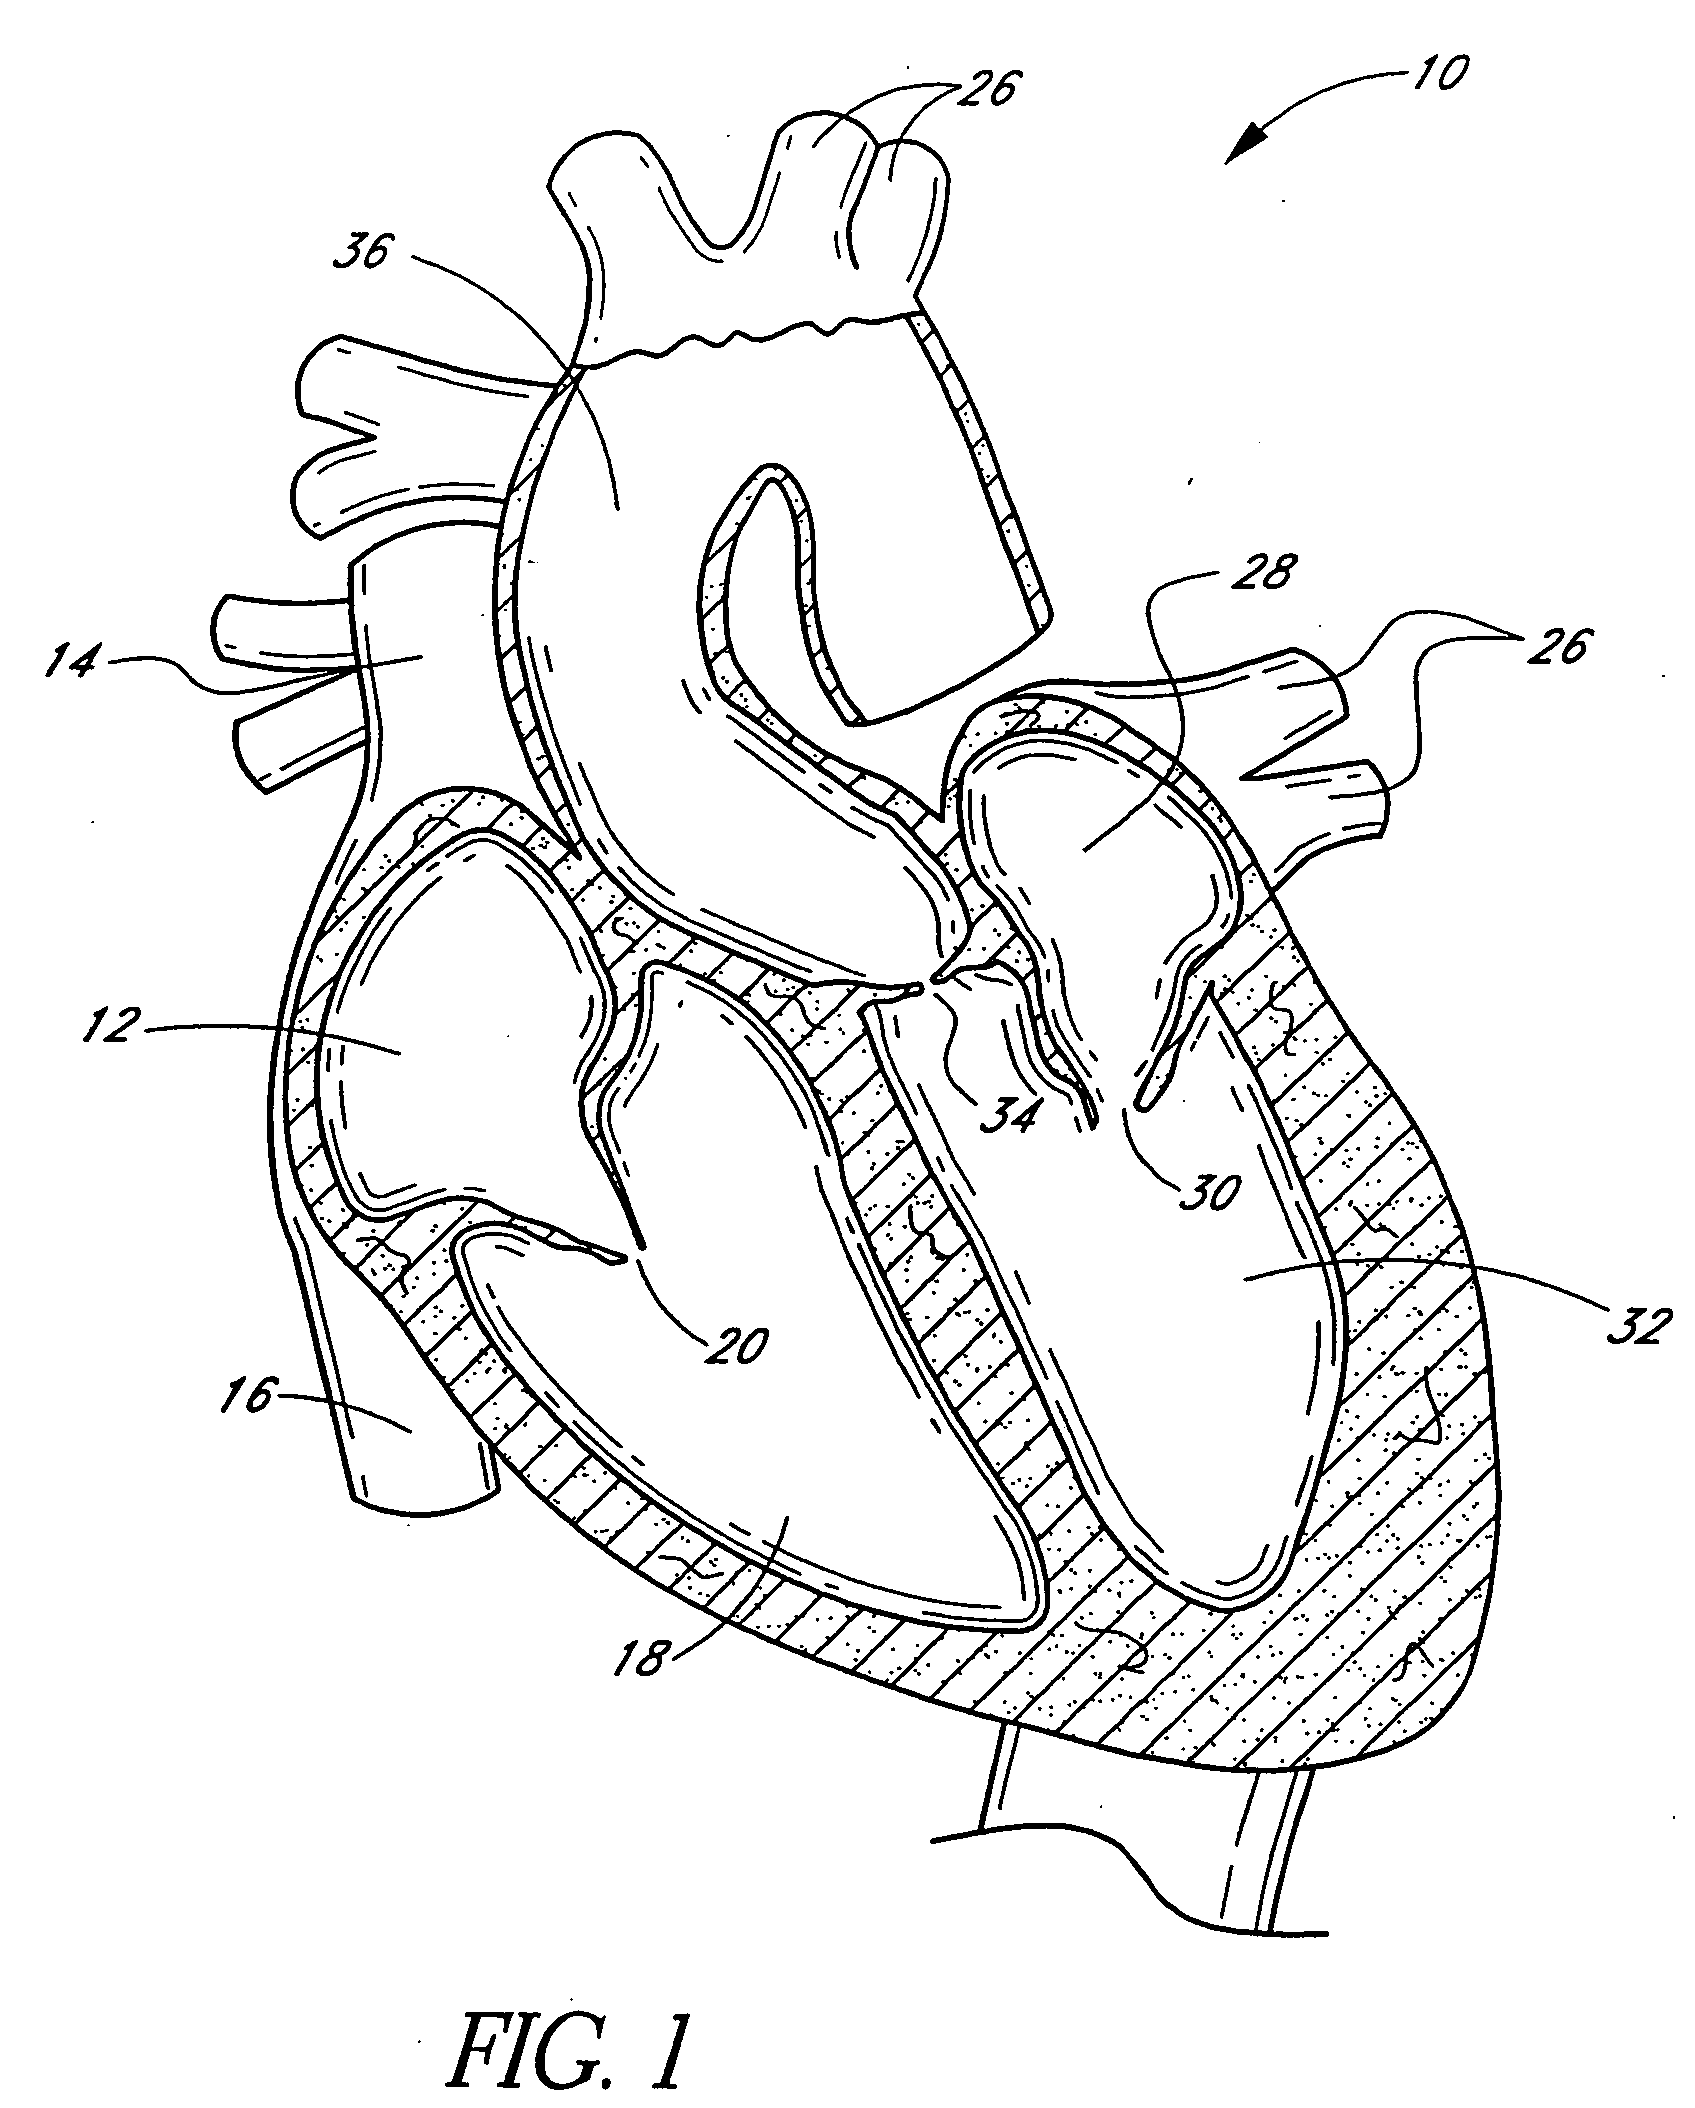 Nonstented heart valves with formed in situ support